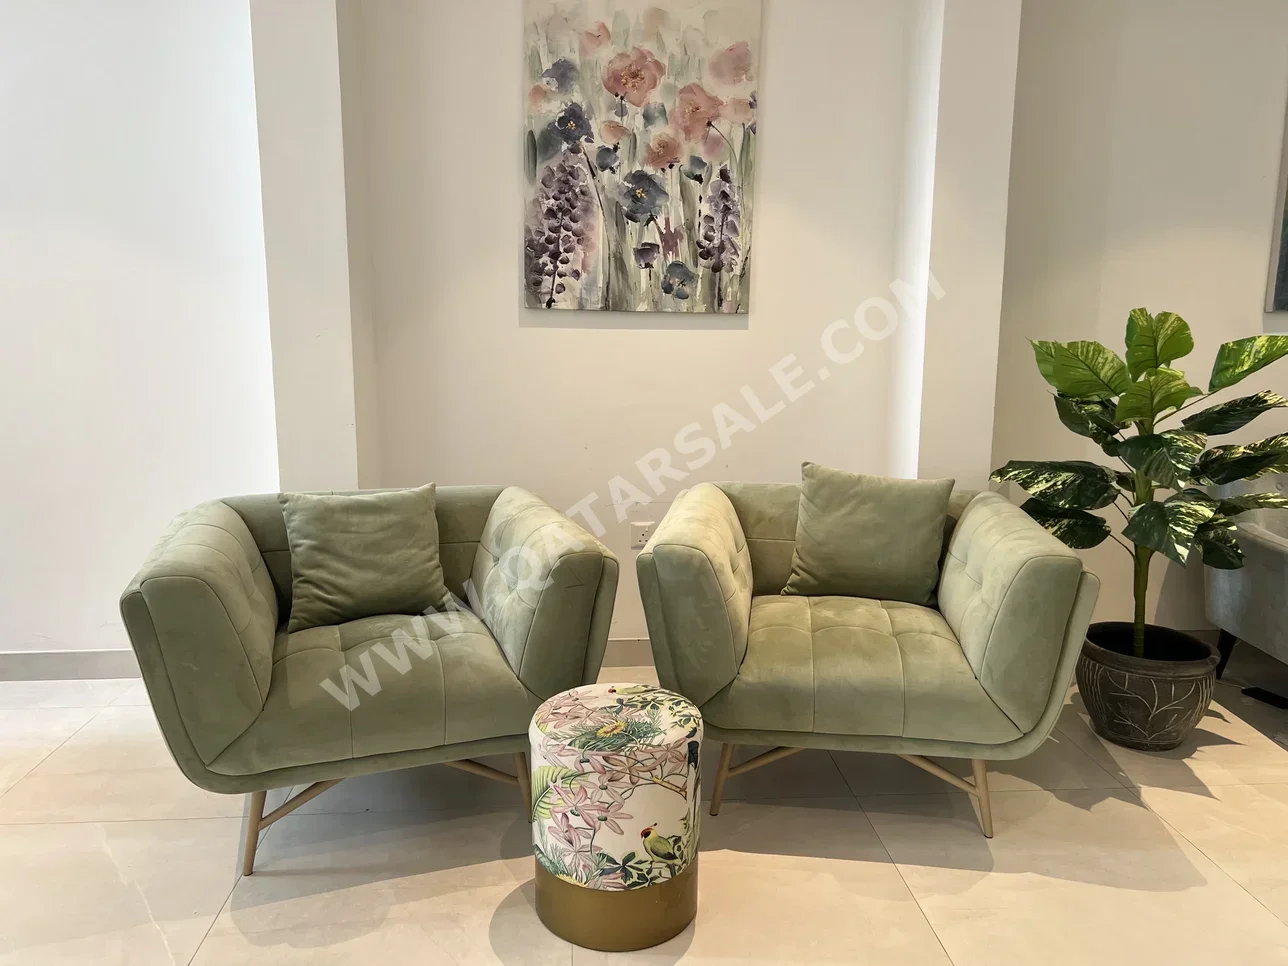 Sofas, Couches & Chairs Homes r Us  Armchair  - Velvet  - Green